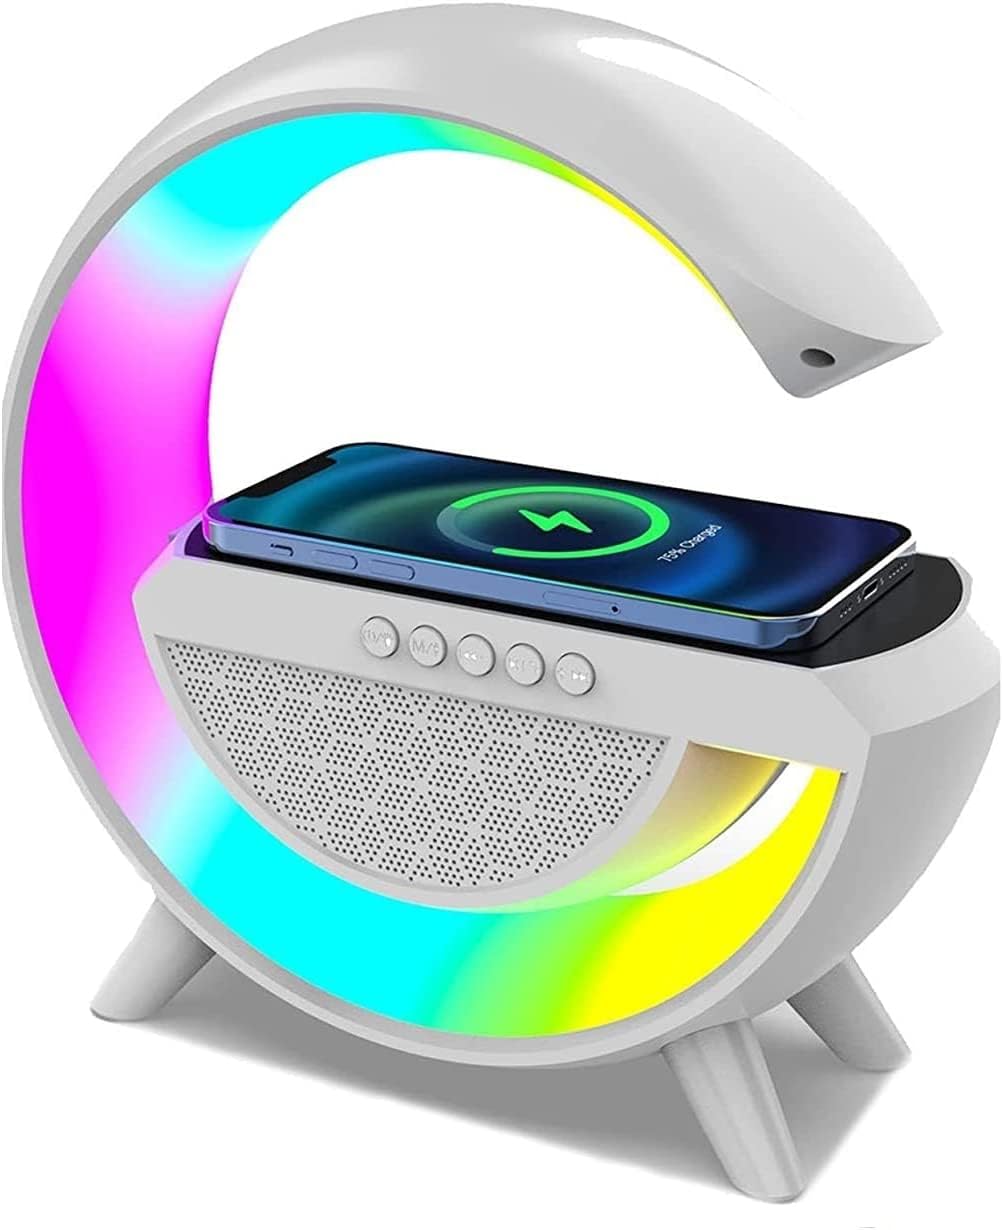 Bluetooth Speaker with Radio and Wireless Mobile Charger OEM BT2301 - White with RBG Lighting